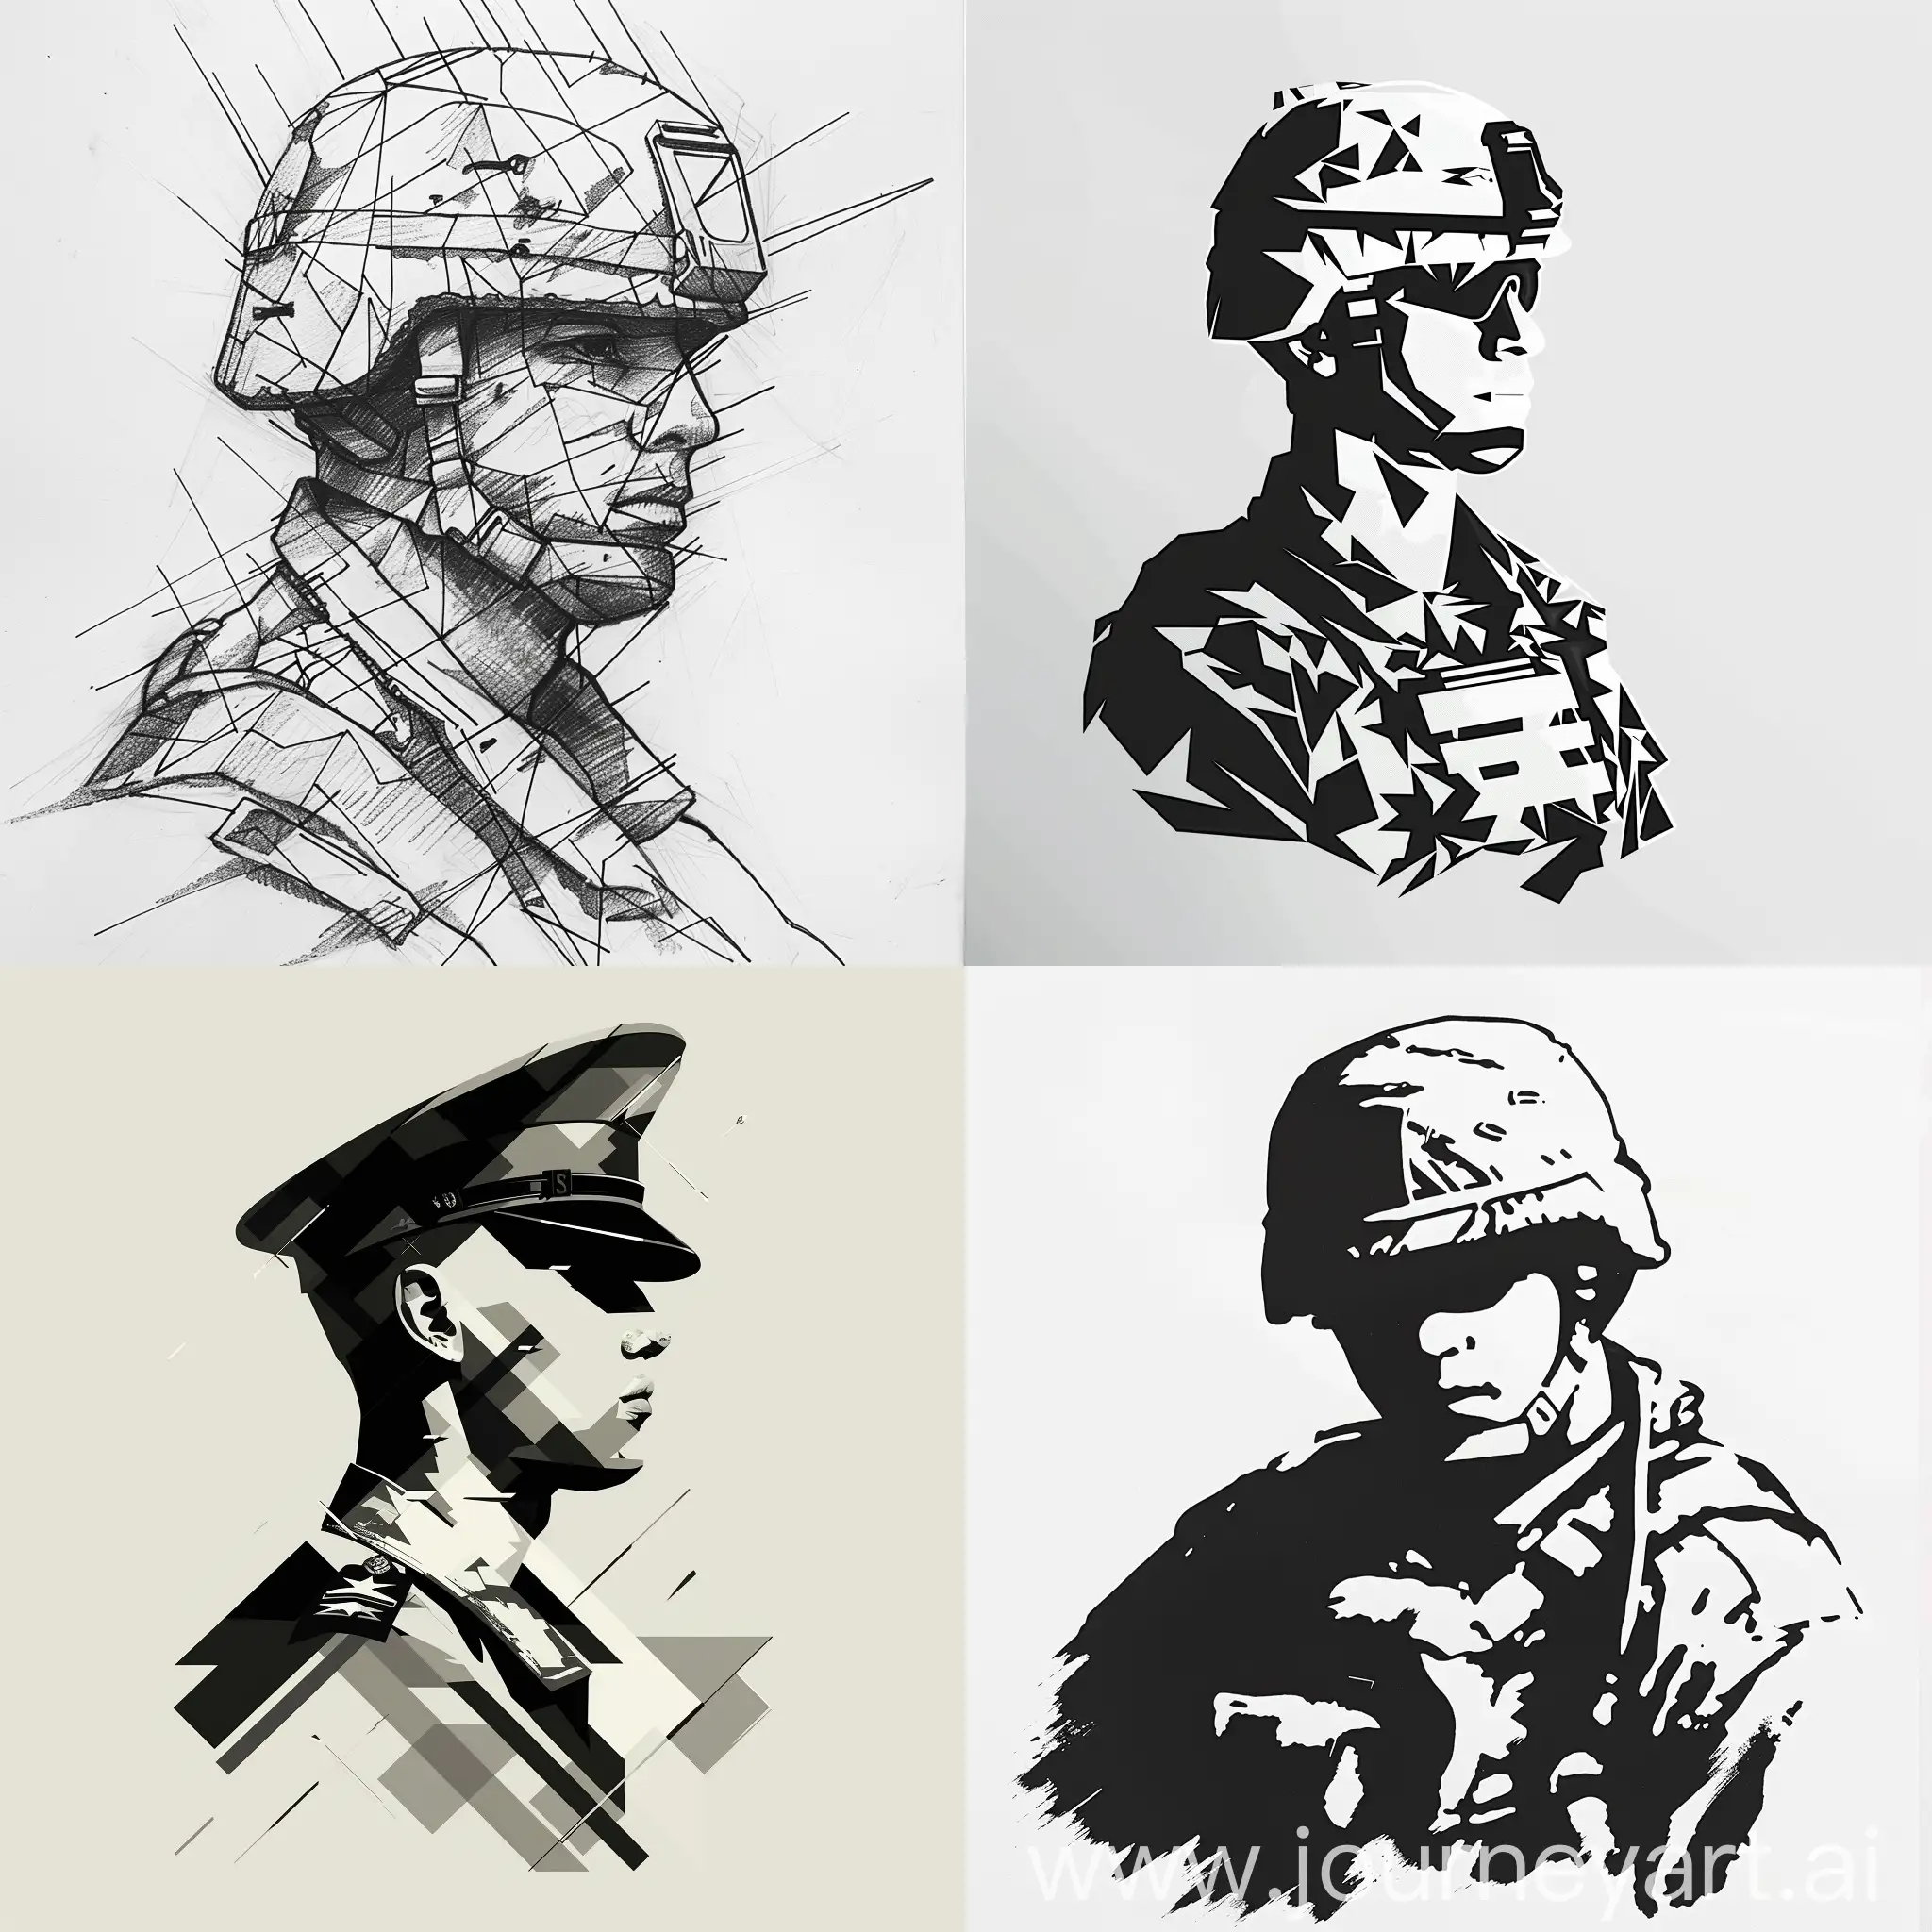 Draw a silhouette of a soldier that consists of simple geometric shapes the silhouette of a soldier should reflect rage and calmness at the same time